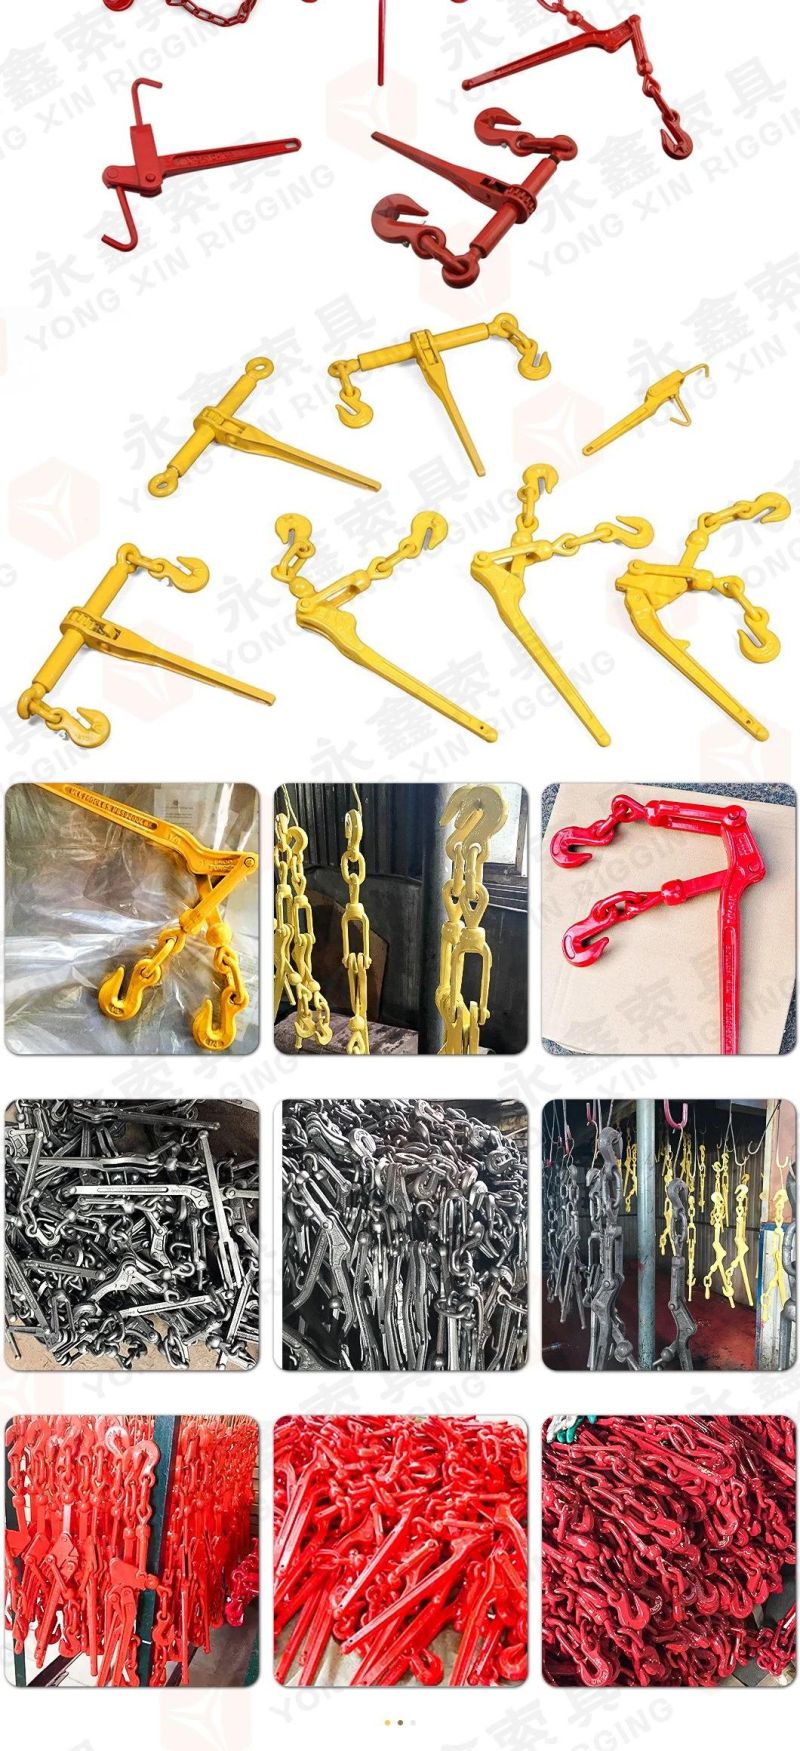 G70 Us Type Chain Lever Type Load Binder for Cargo Control and Tie Down